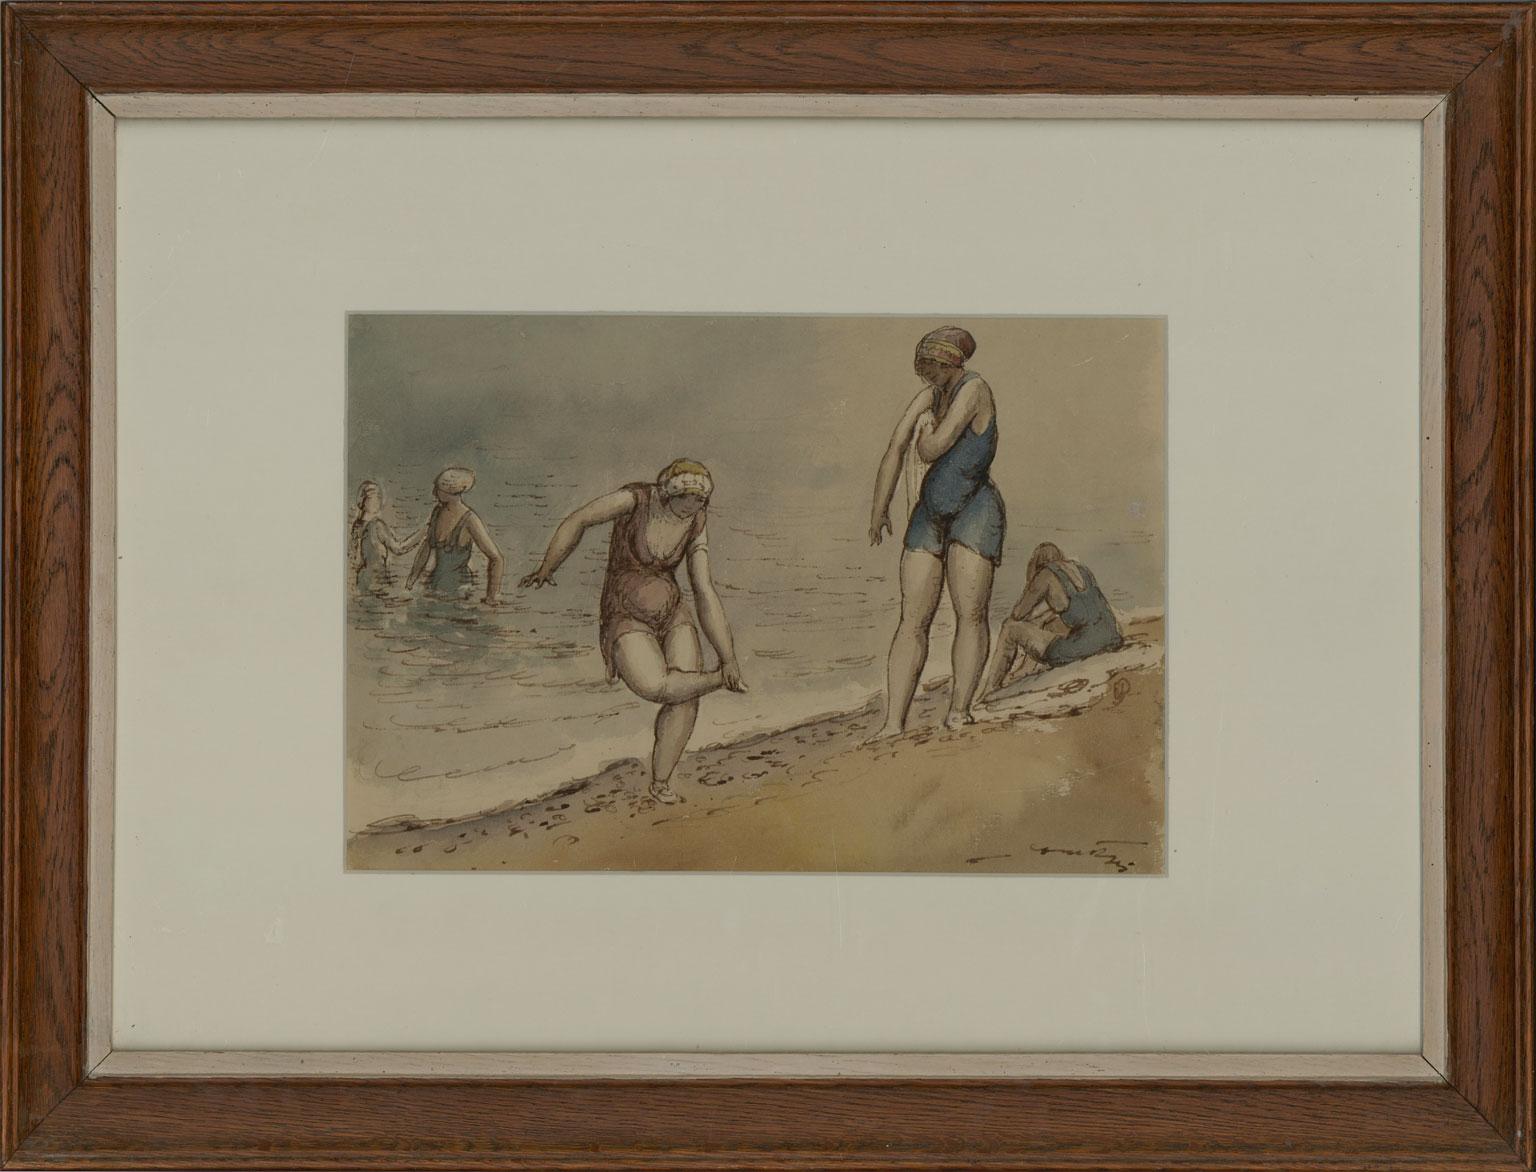 A beautifully observed study of bathers on an English beach by Harold Hope Read, painted in the artist's typical narrative style. This is a wonderful example of Hope Read's beach scenes, many of which are featured in our collection. His bathers are